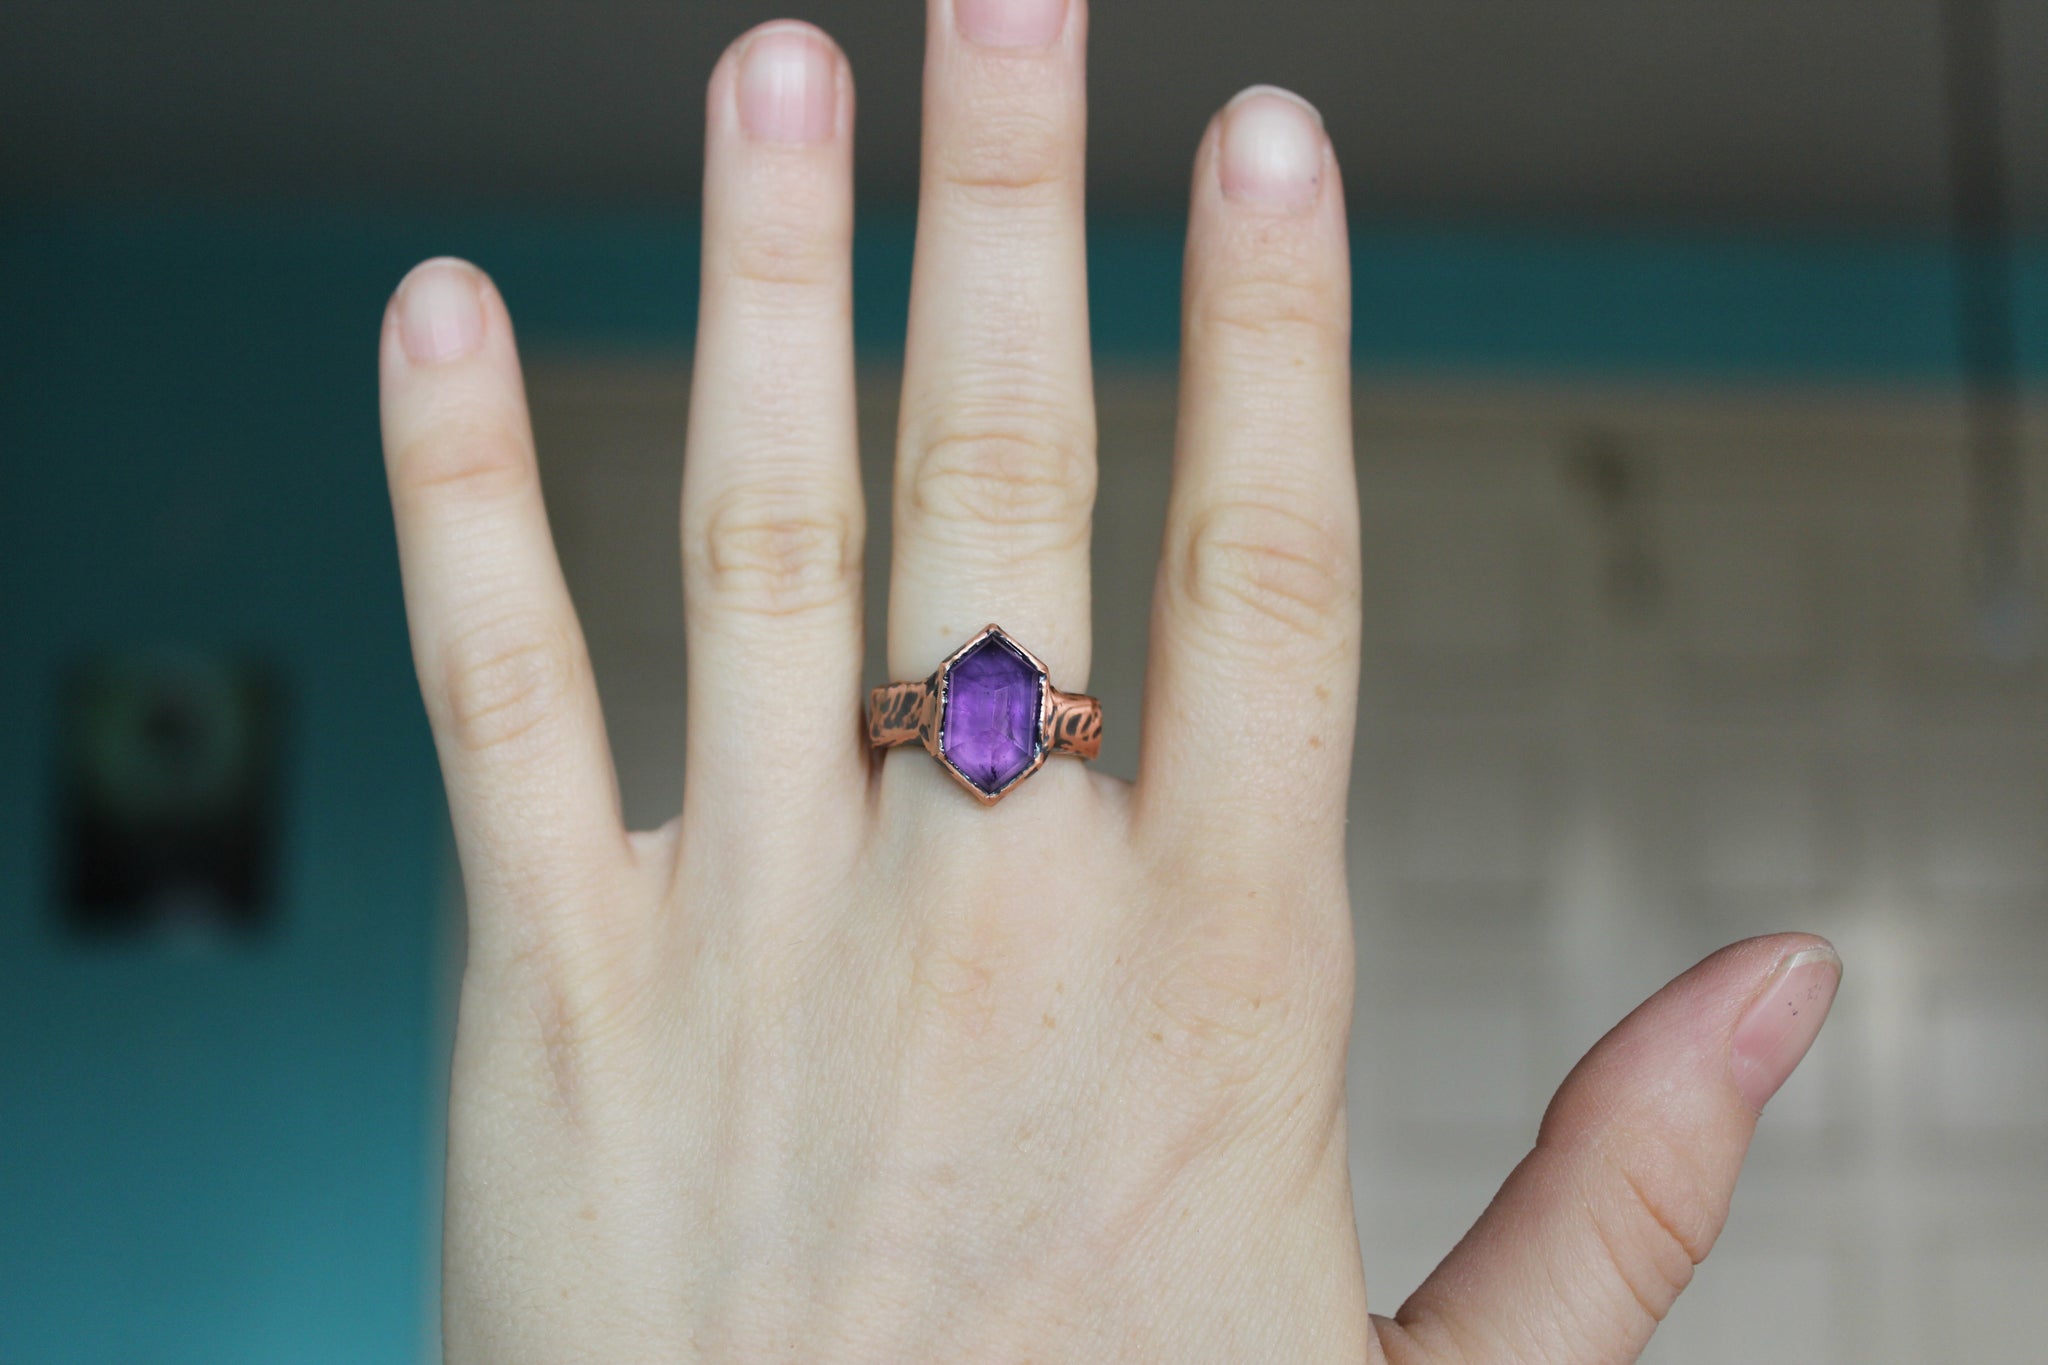 Deep Purple Faceted Amethyst Ring size 6.75